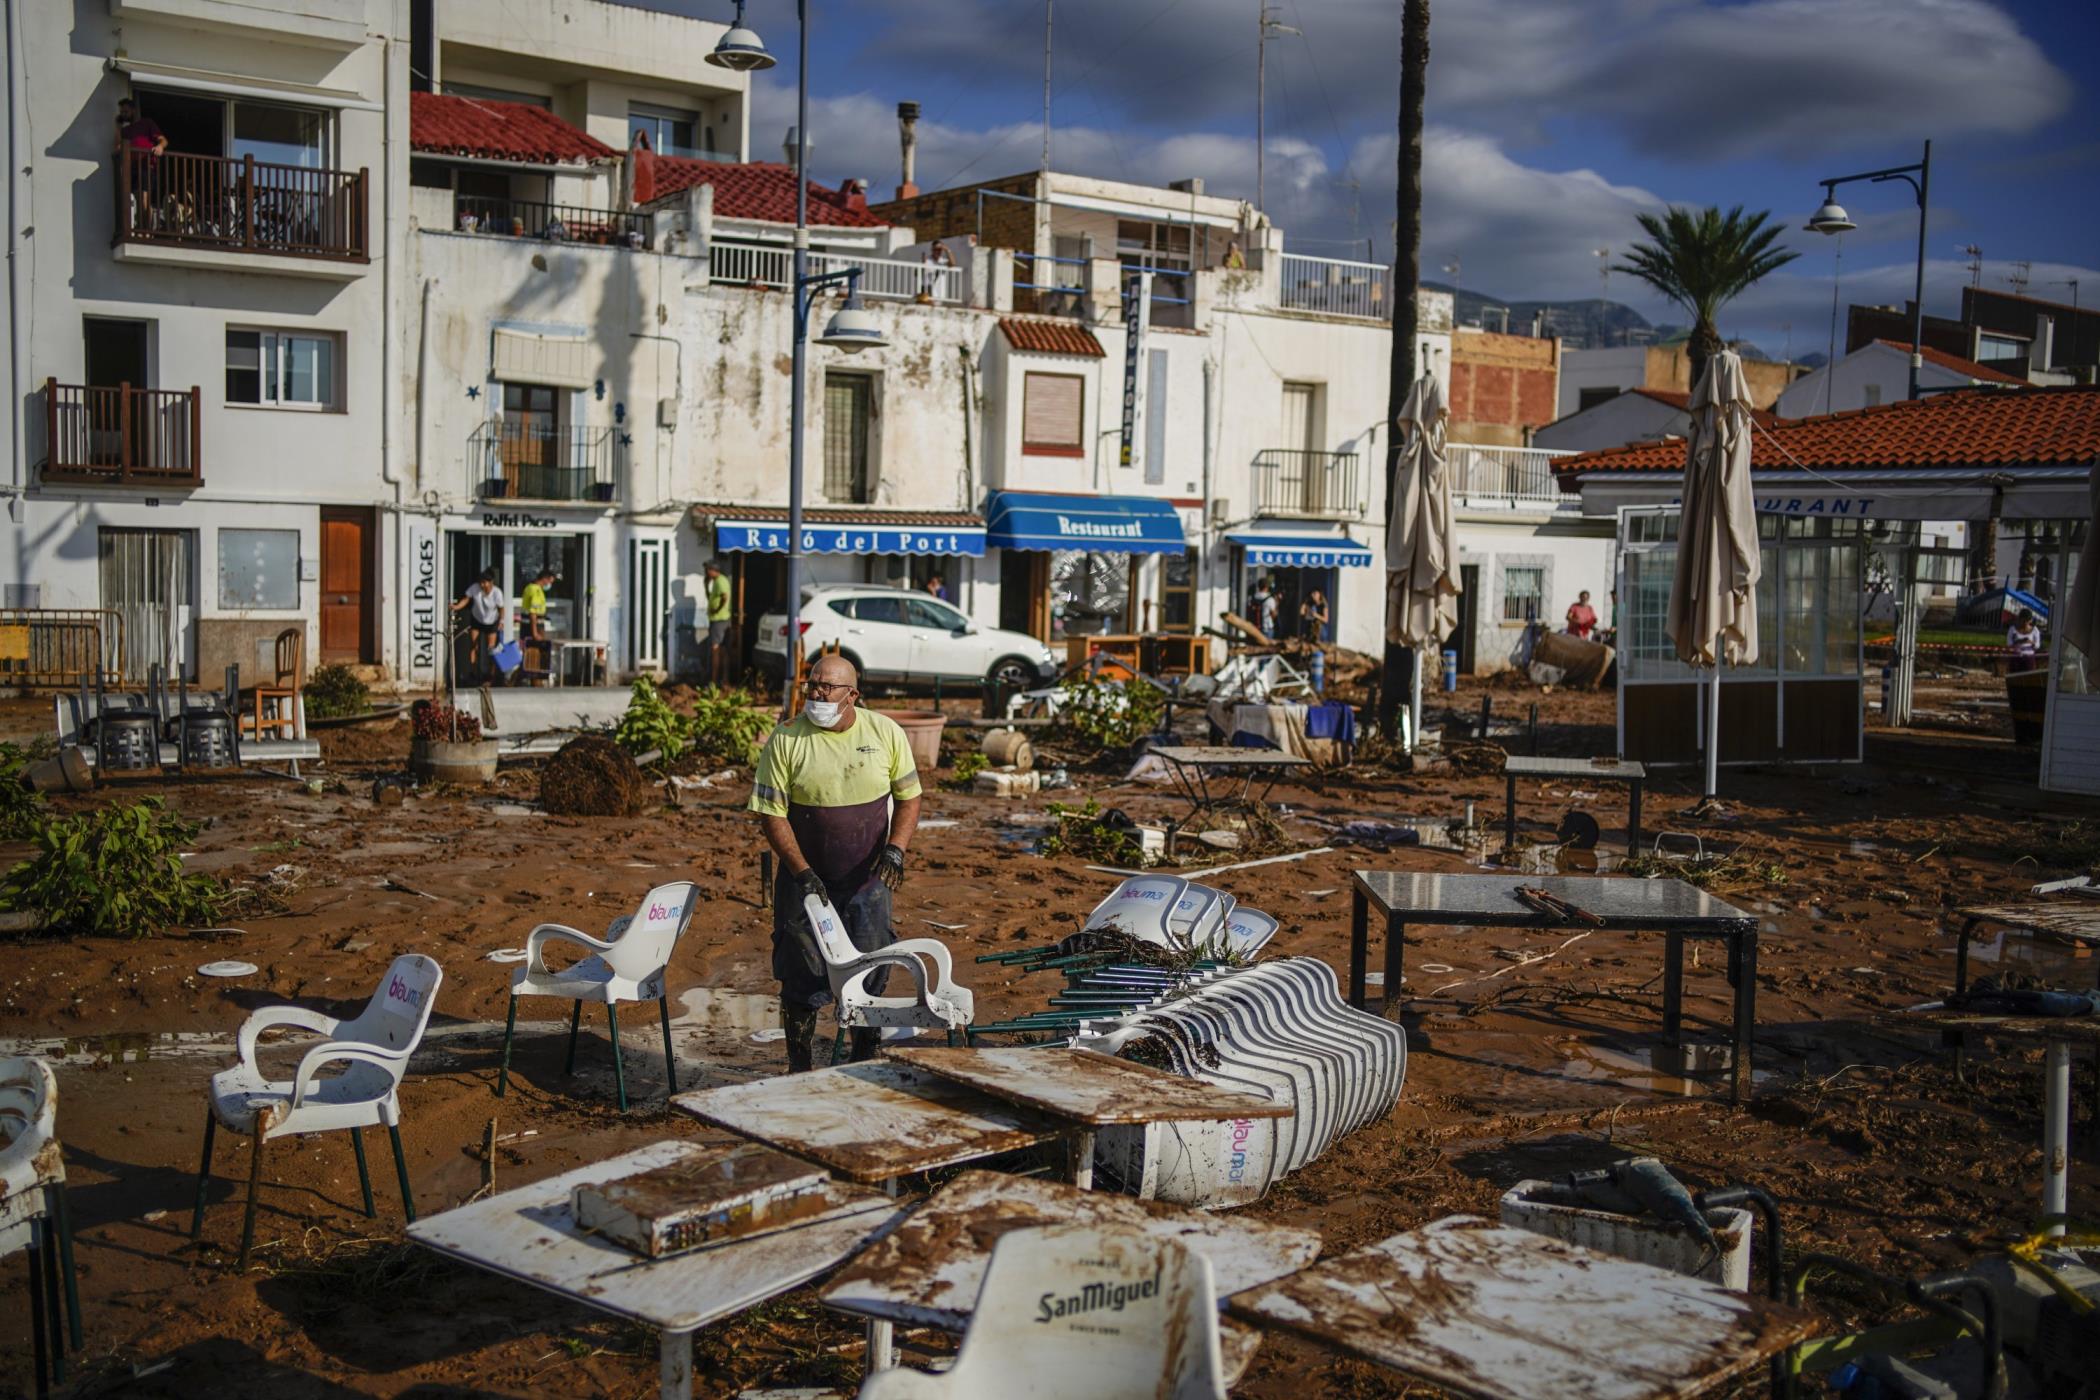 A municipality worker cleans up after flooding in a seaside town of Alcanar, in northeastern Spain, Sept. 2, 2021. (AP Photo)